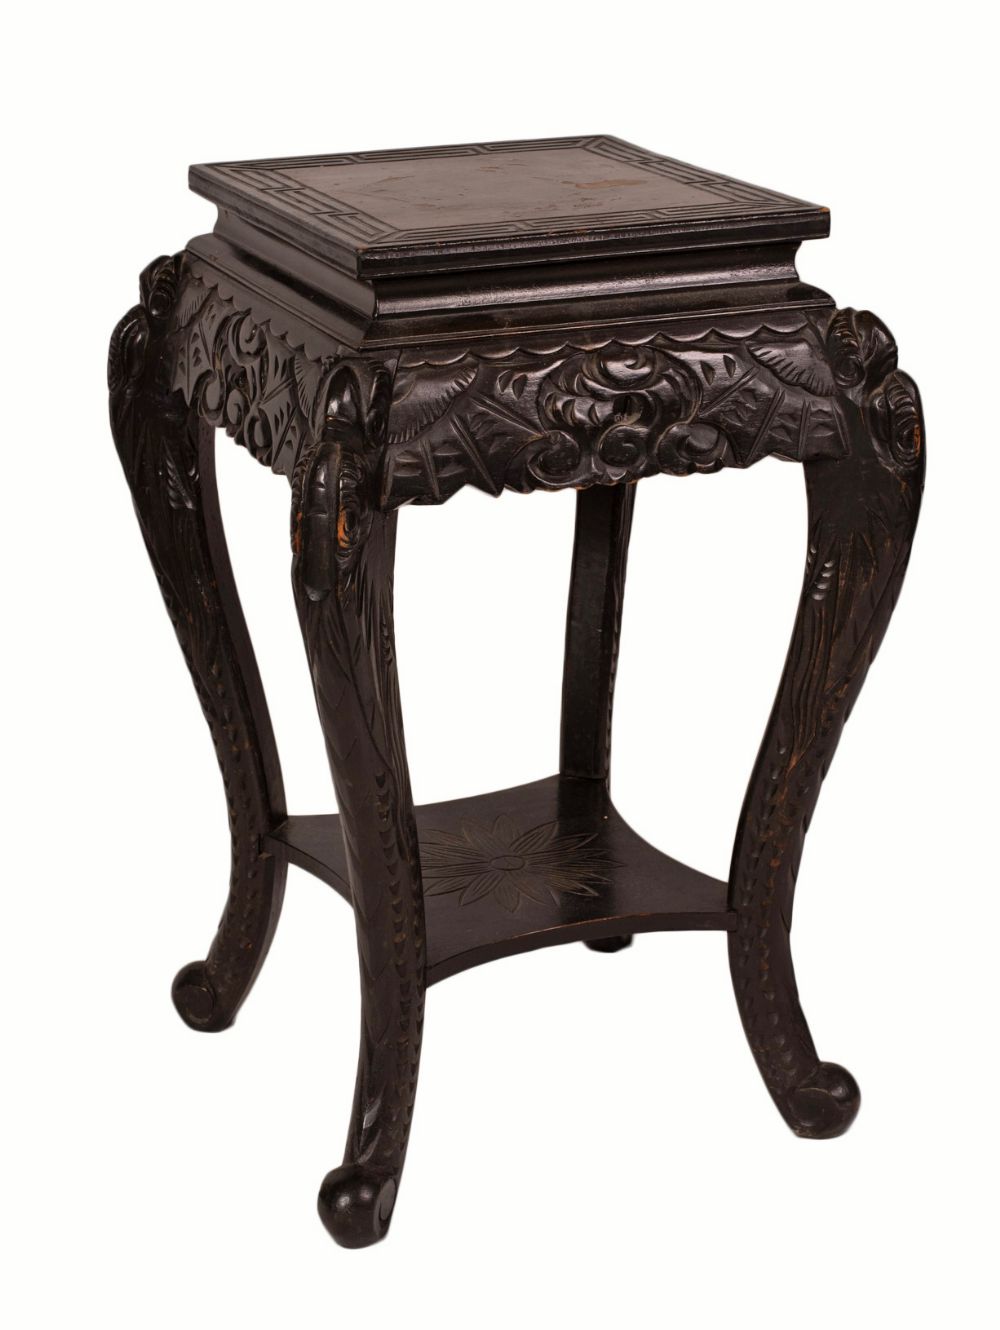 Ornate Plant Stand at Dolan's Art Auction House